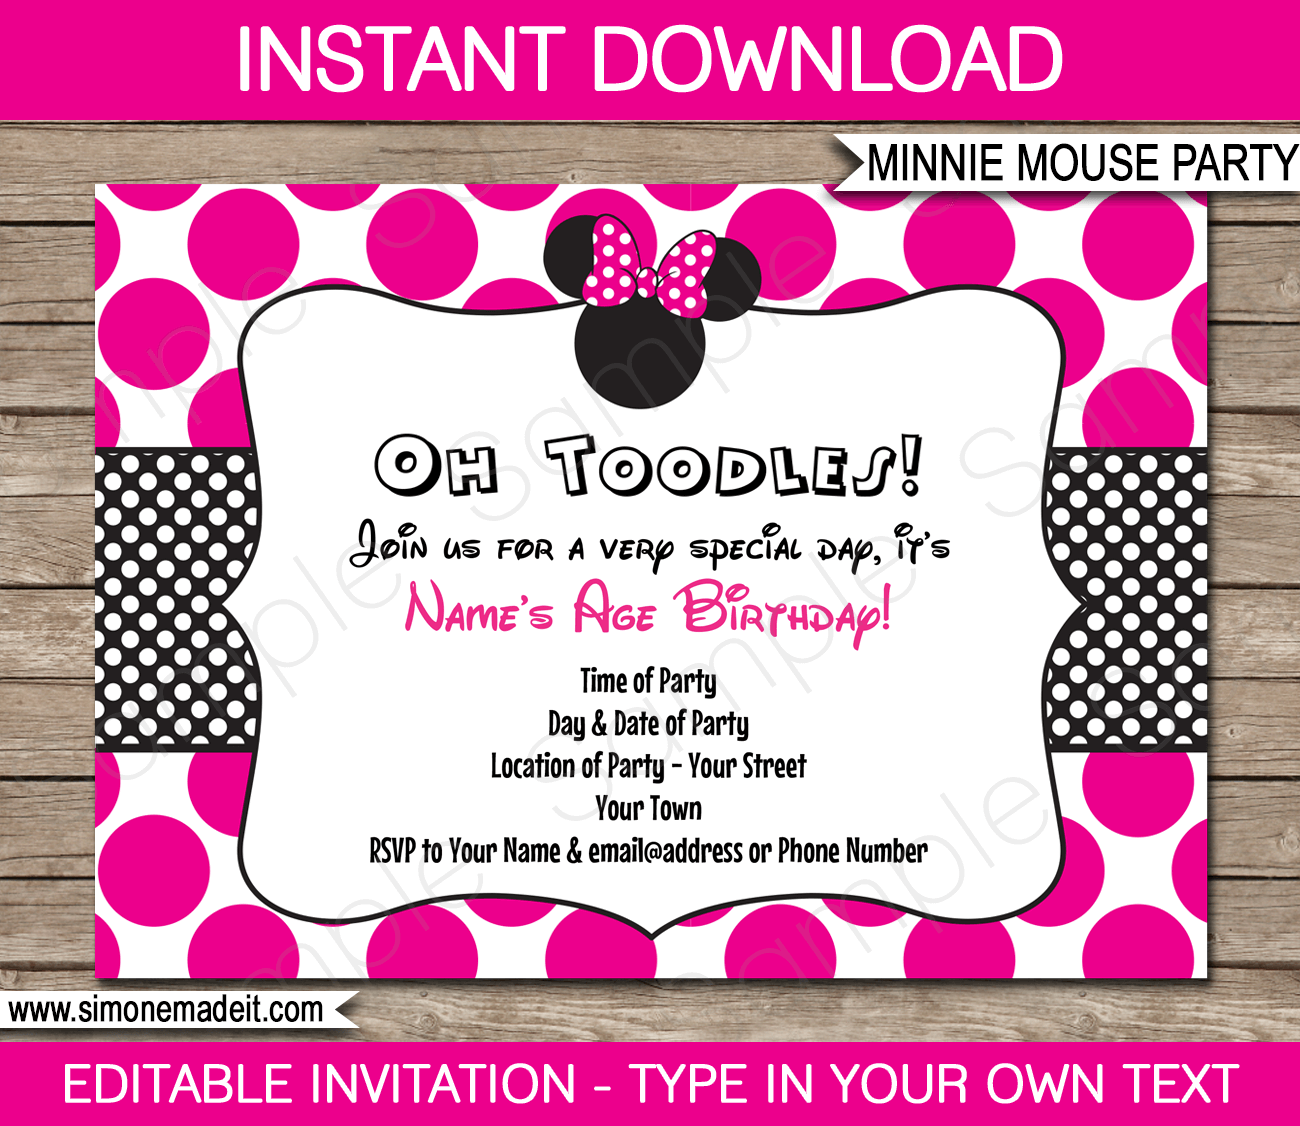 minnie-mouse-party-invitations-template-birthday-party